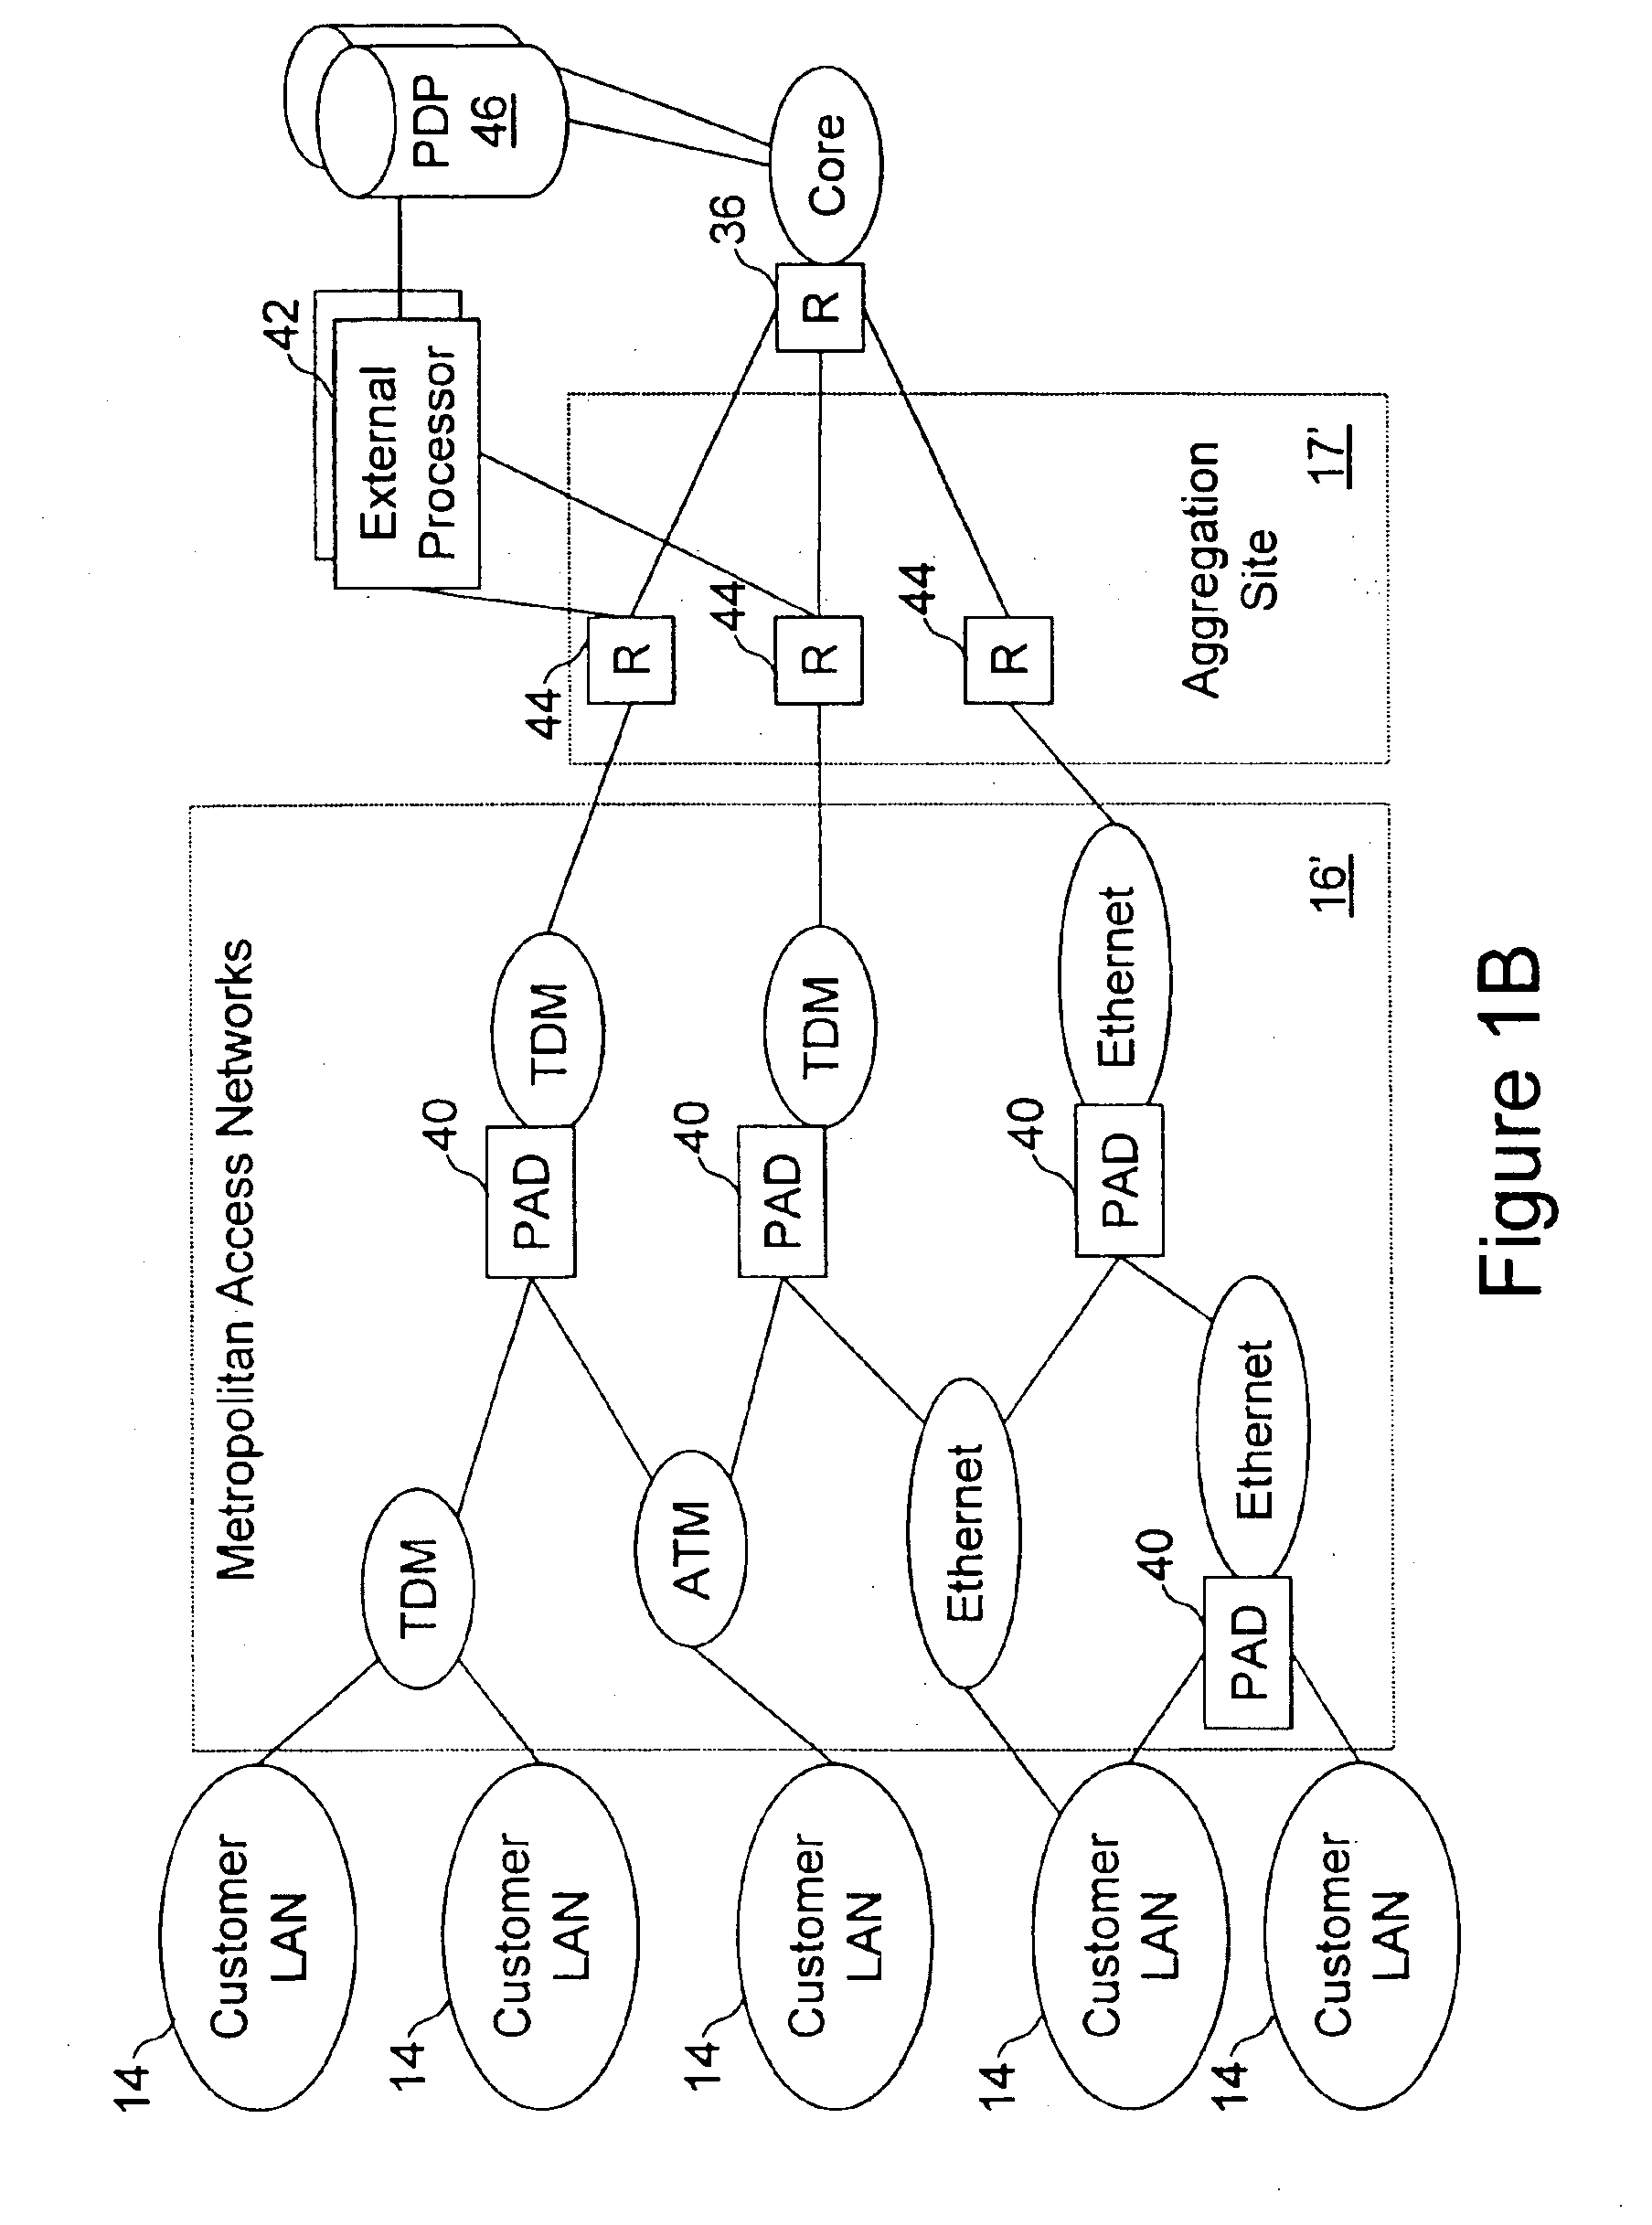 Network access system including a programmable access device having distributed service control